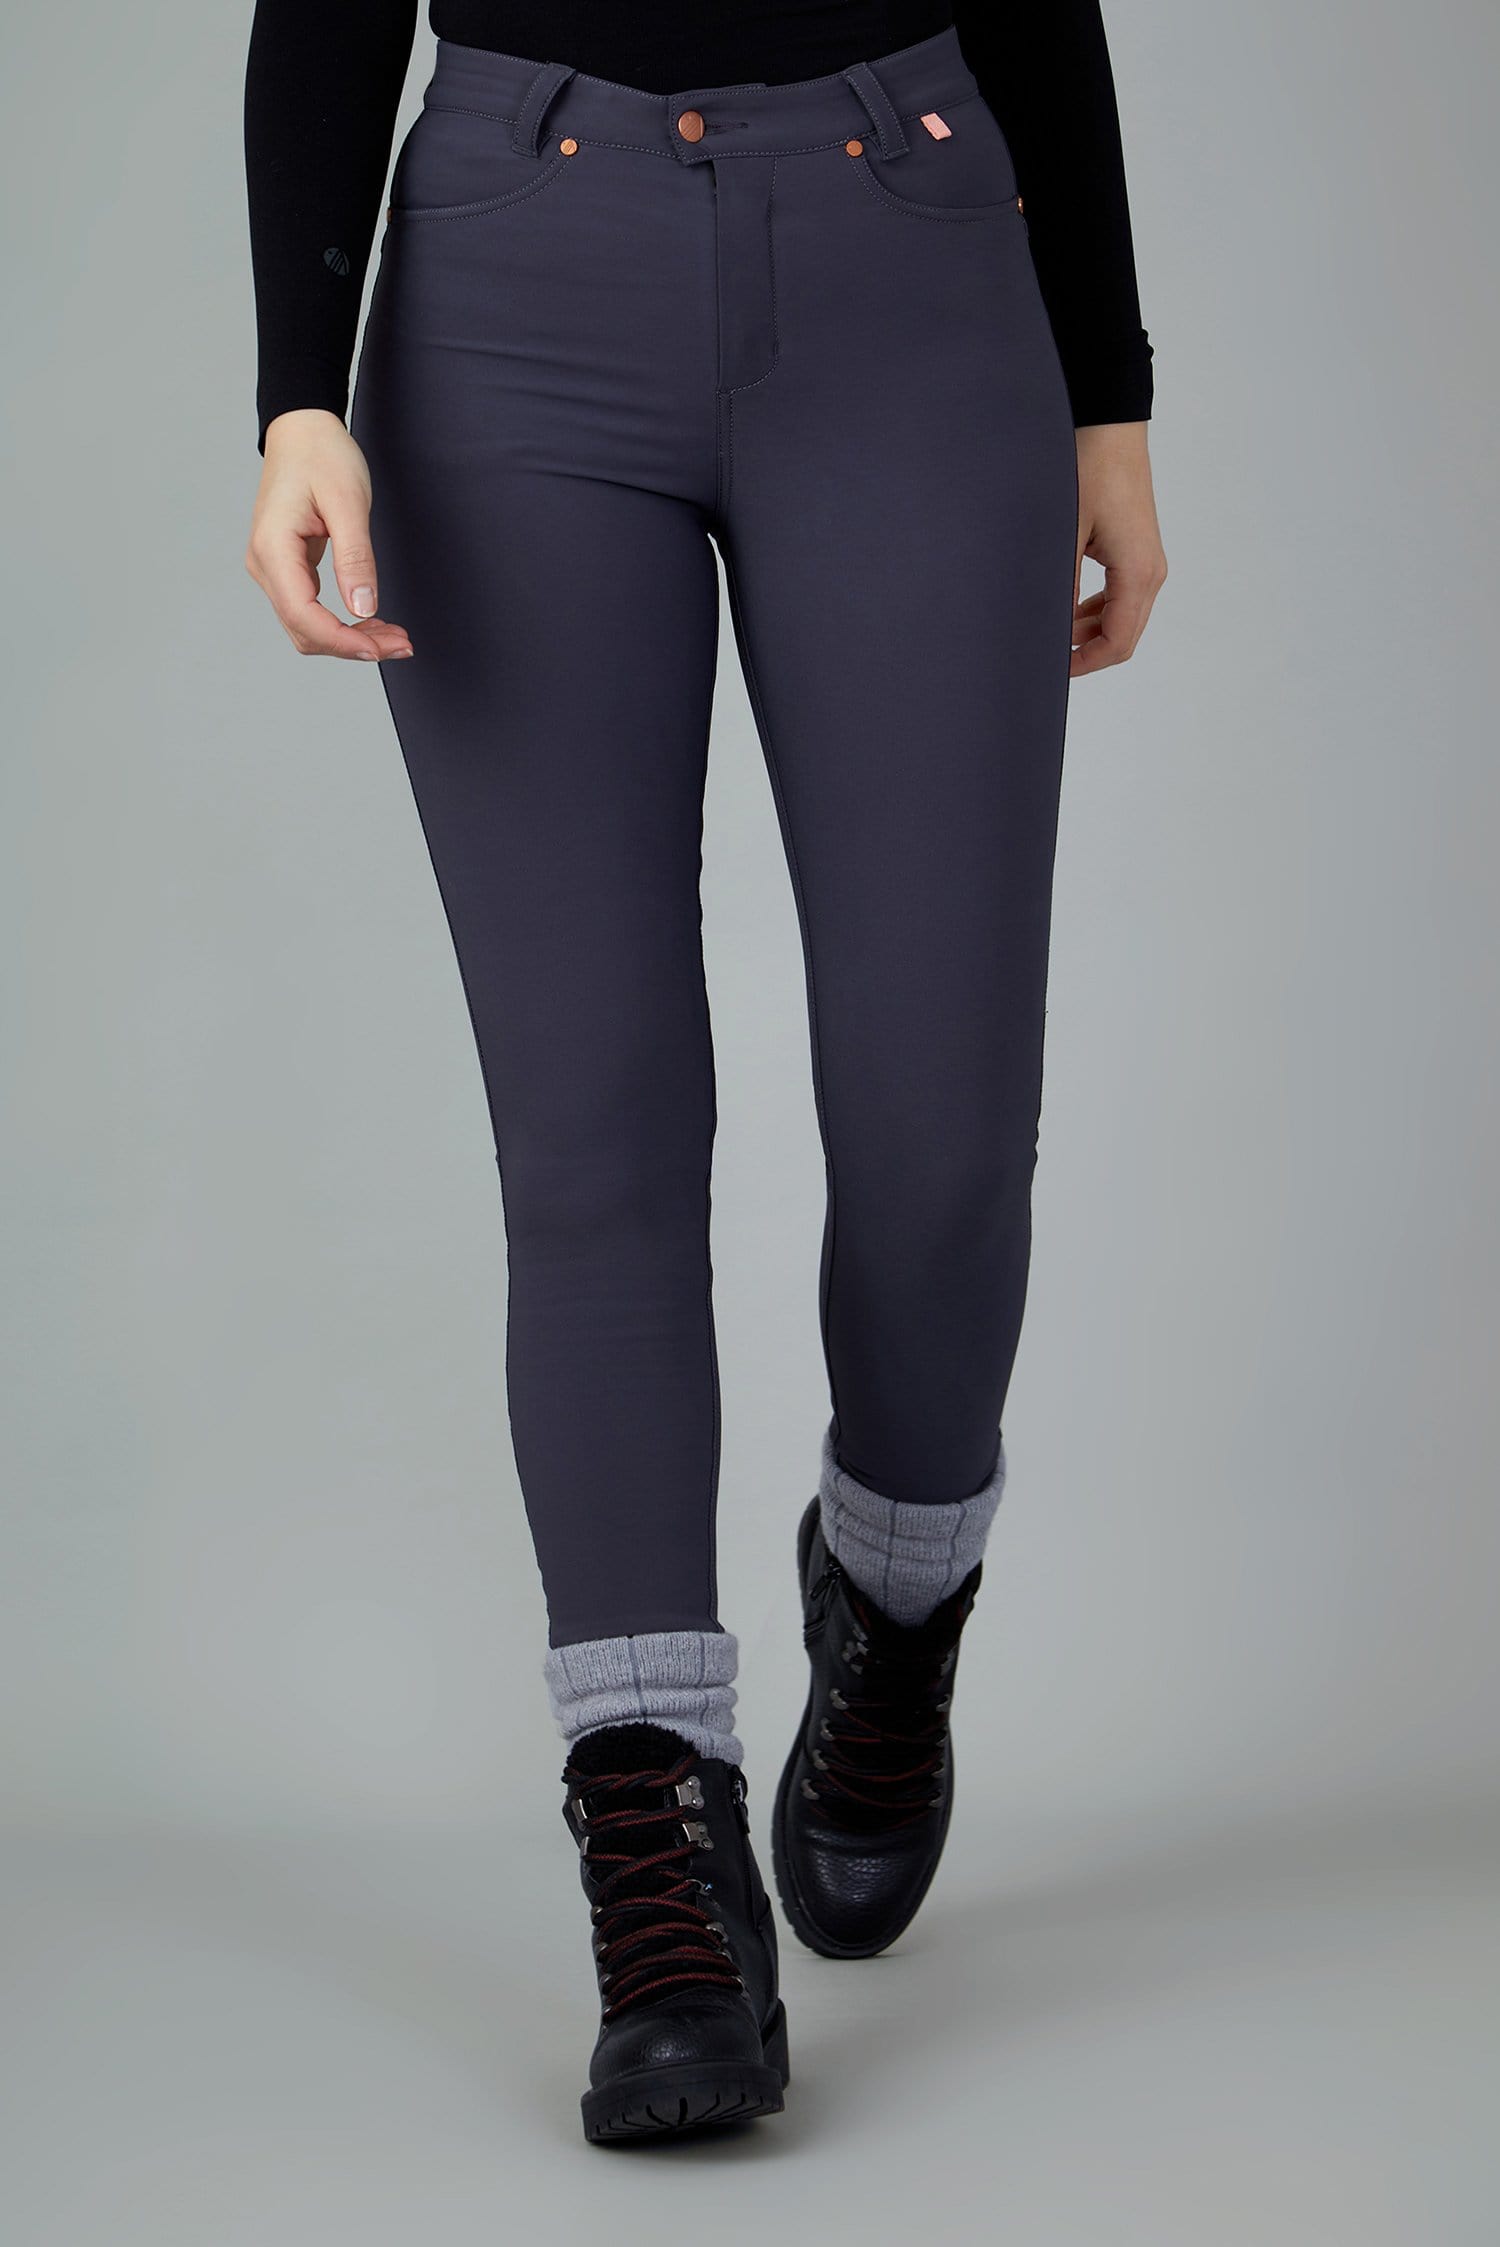 The Aventurite Stretch Skinny Outdoor Trousers - Obsidian - 28r / Uk10 - Womens - Acai Outdoorwear